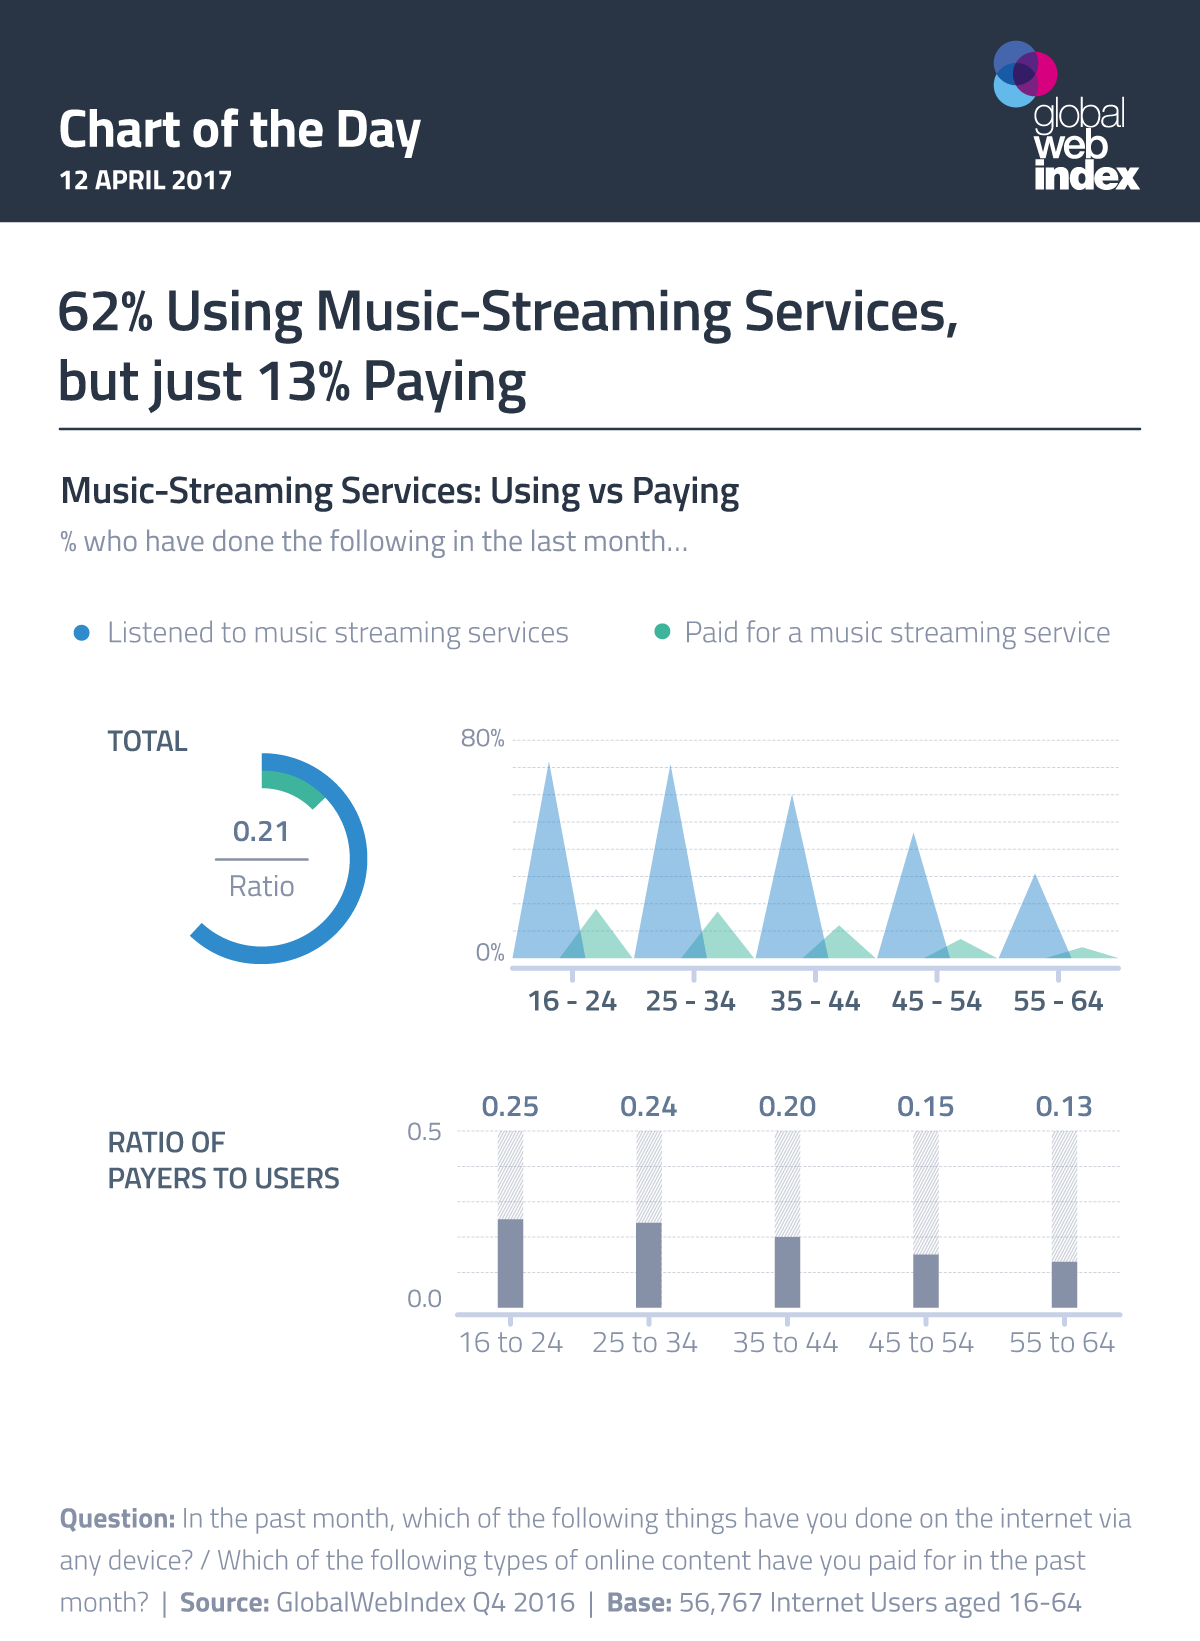 62% Using Music-Streaming Services, but just 13% Paying